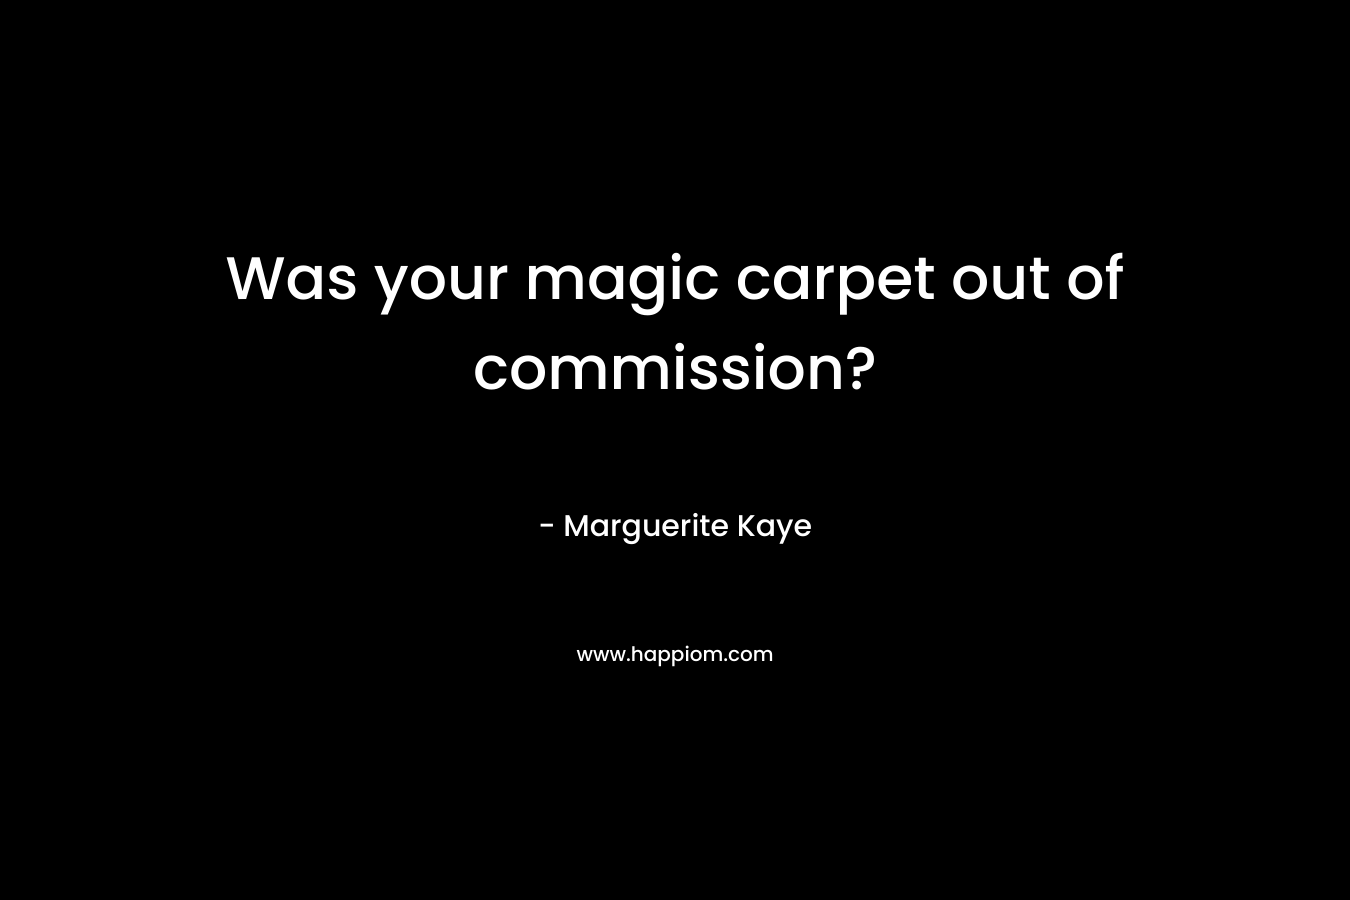 Was your magic carpet out of commission?